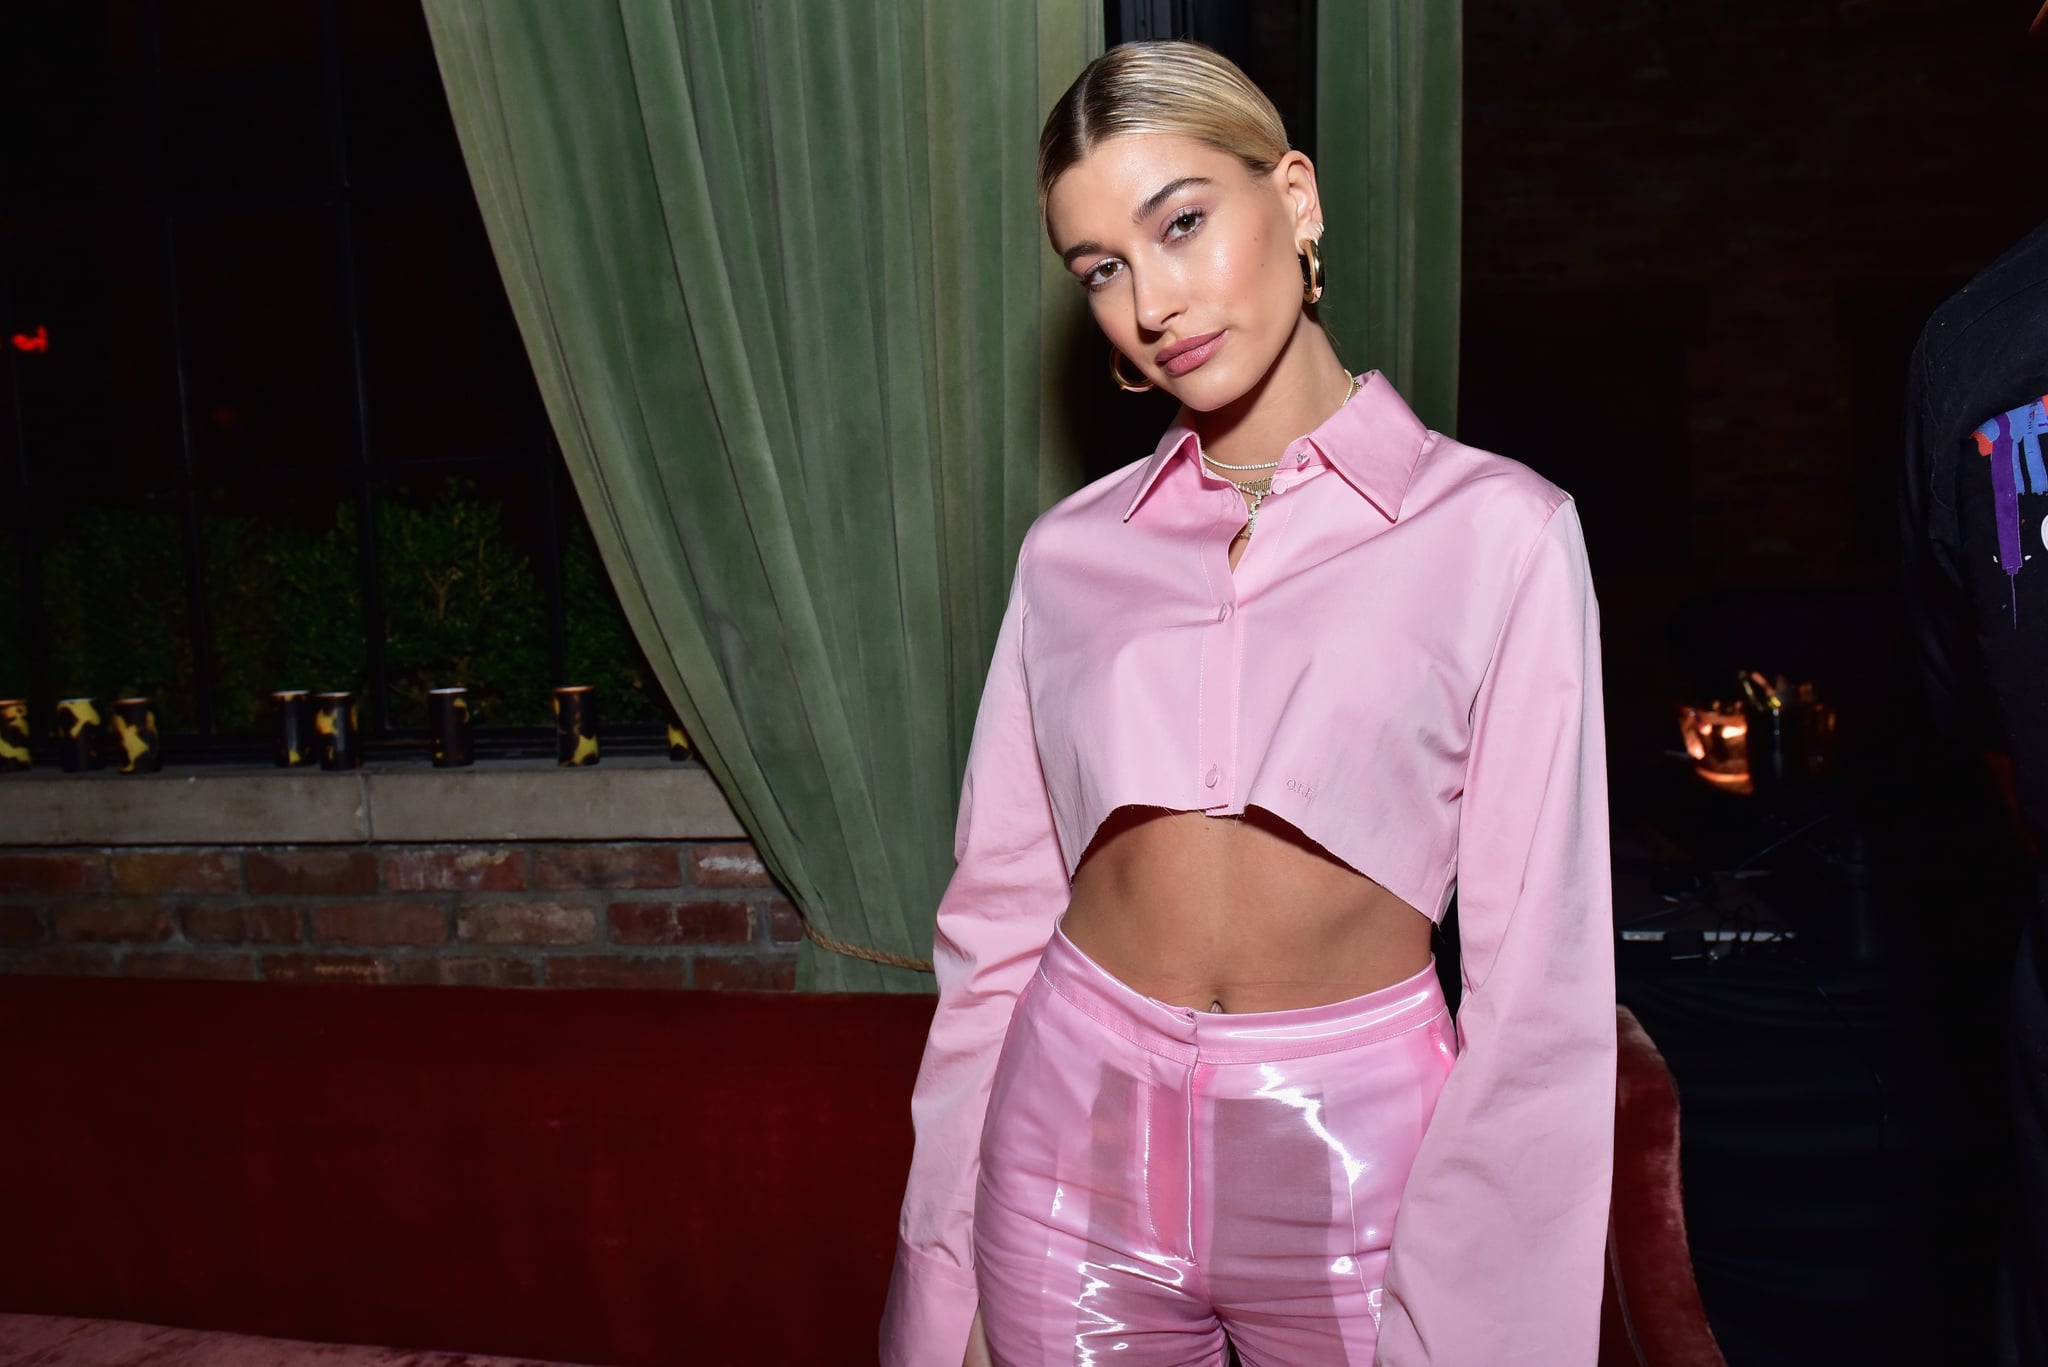 NEW YORK, NY - JANUARY 26:  Hailey Baldwin attends McDonald's Celebrates Music's Hottest Night With The Chainsmokers at The Bowery Hotel  on January 26, 2018 in New York City.  (Photo by Sean Zanni/Getty Images for McDonald's)